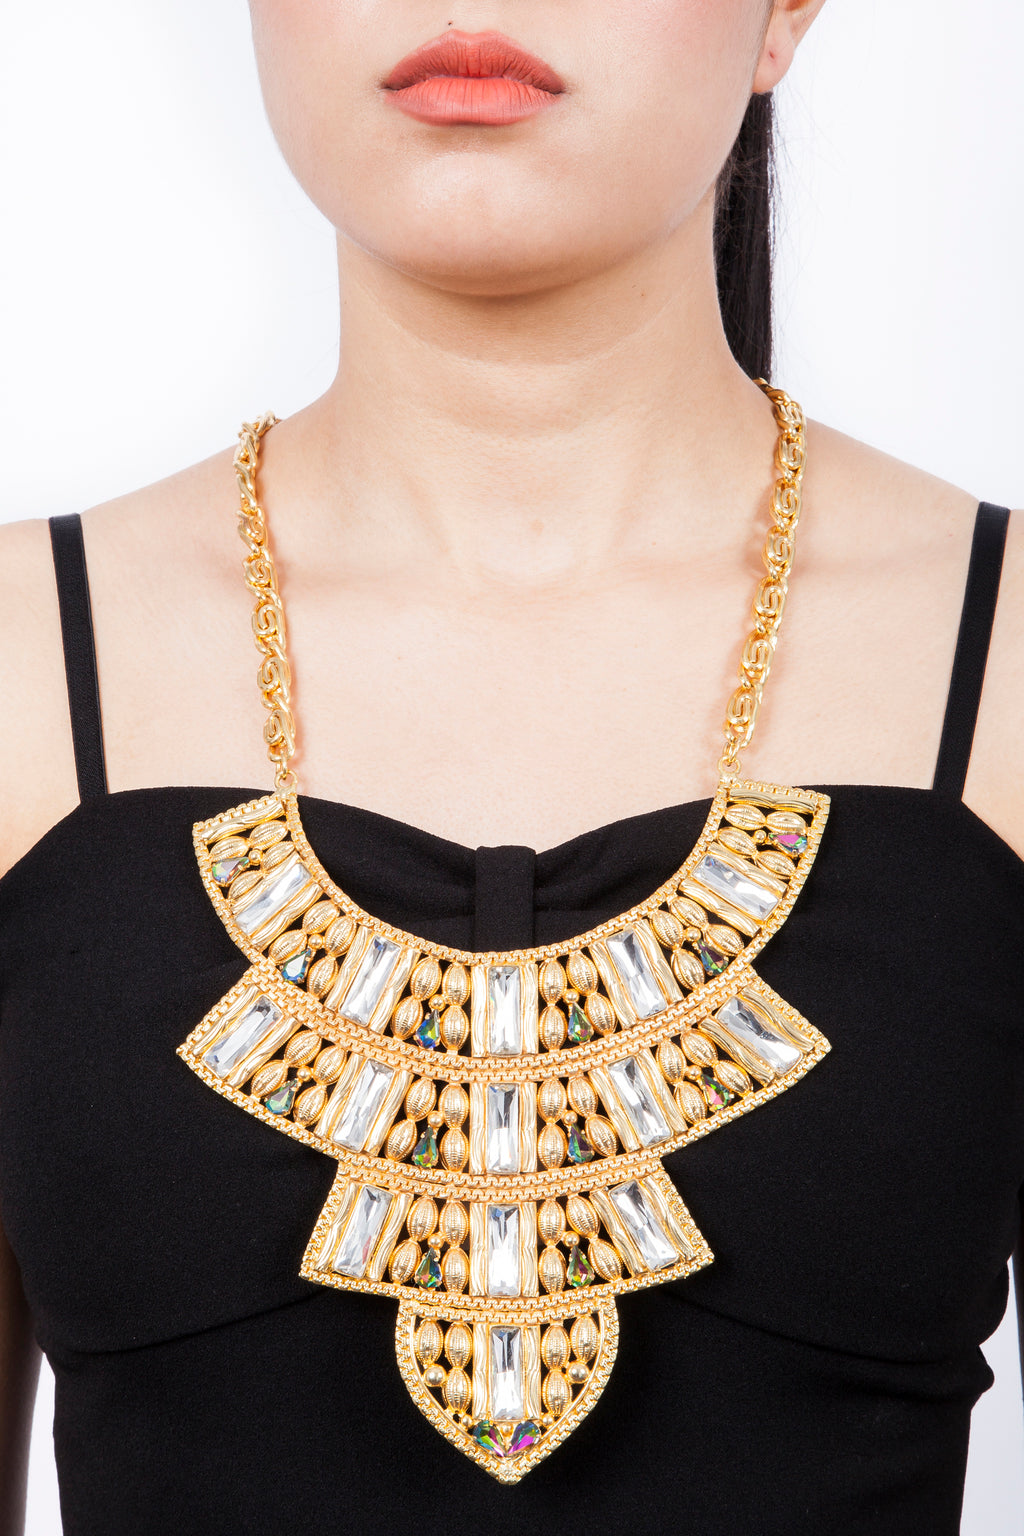 Valliyan India Jewelry Gold Statement Necklace Large Necklace